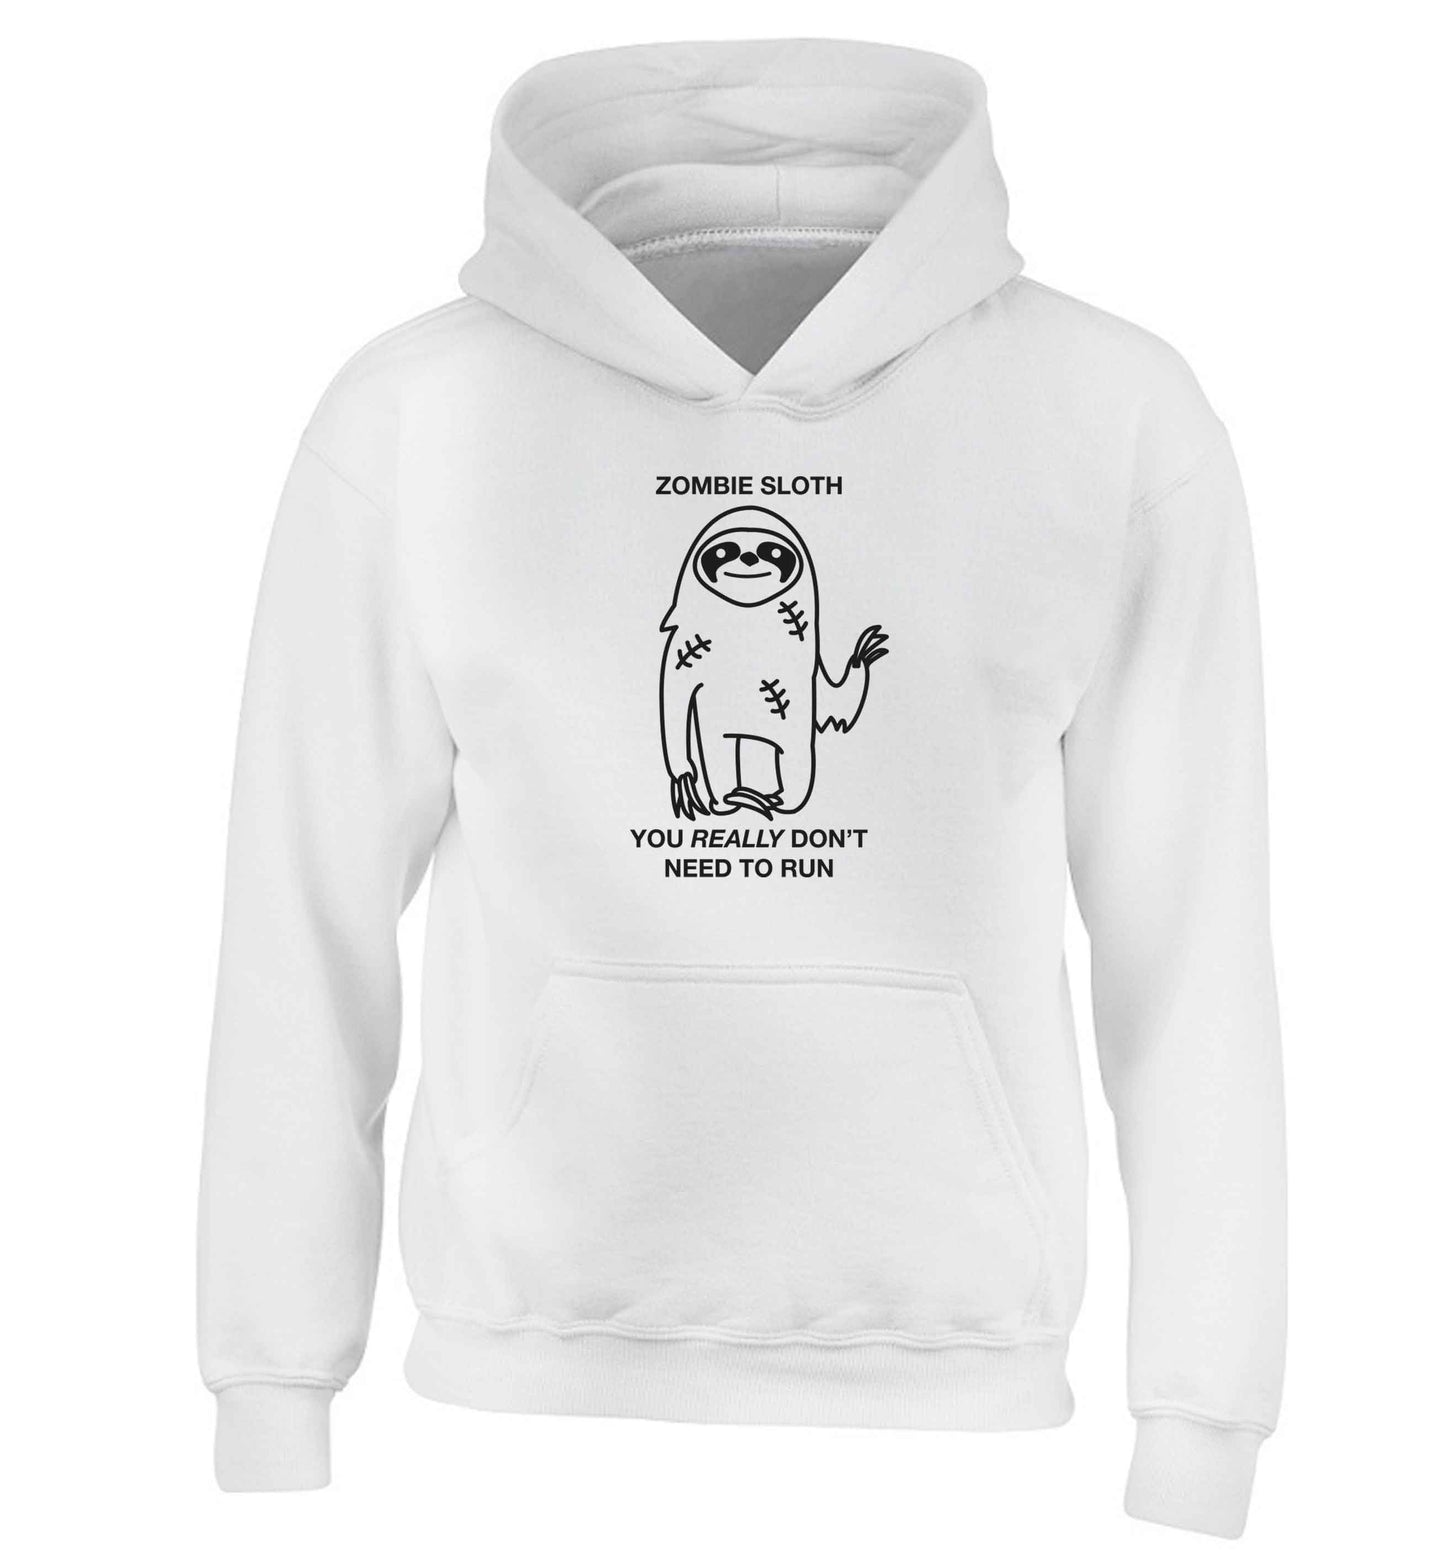 Zombie sloth you really don't need to run children's white hoodie 12-13 Years